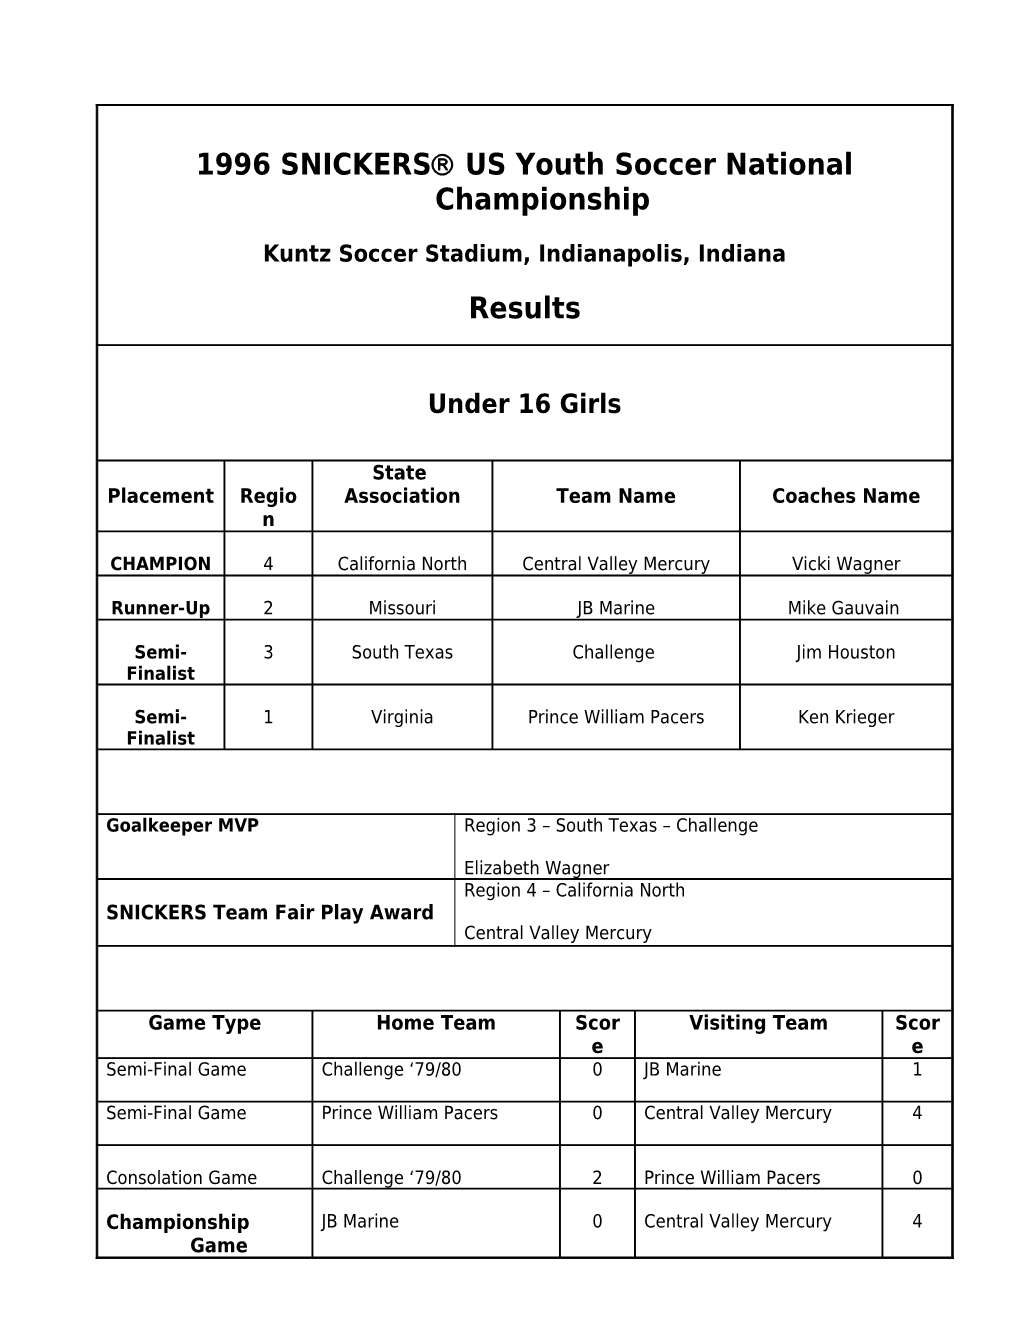 1999 SNICKERS US Youth Soccer National Championship